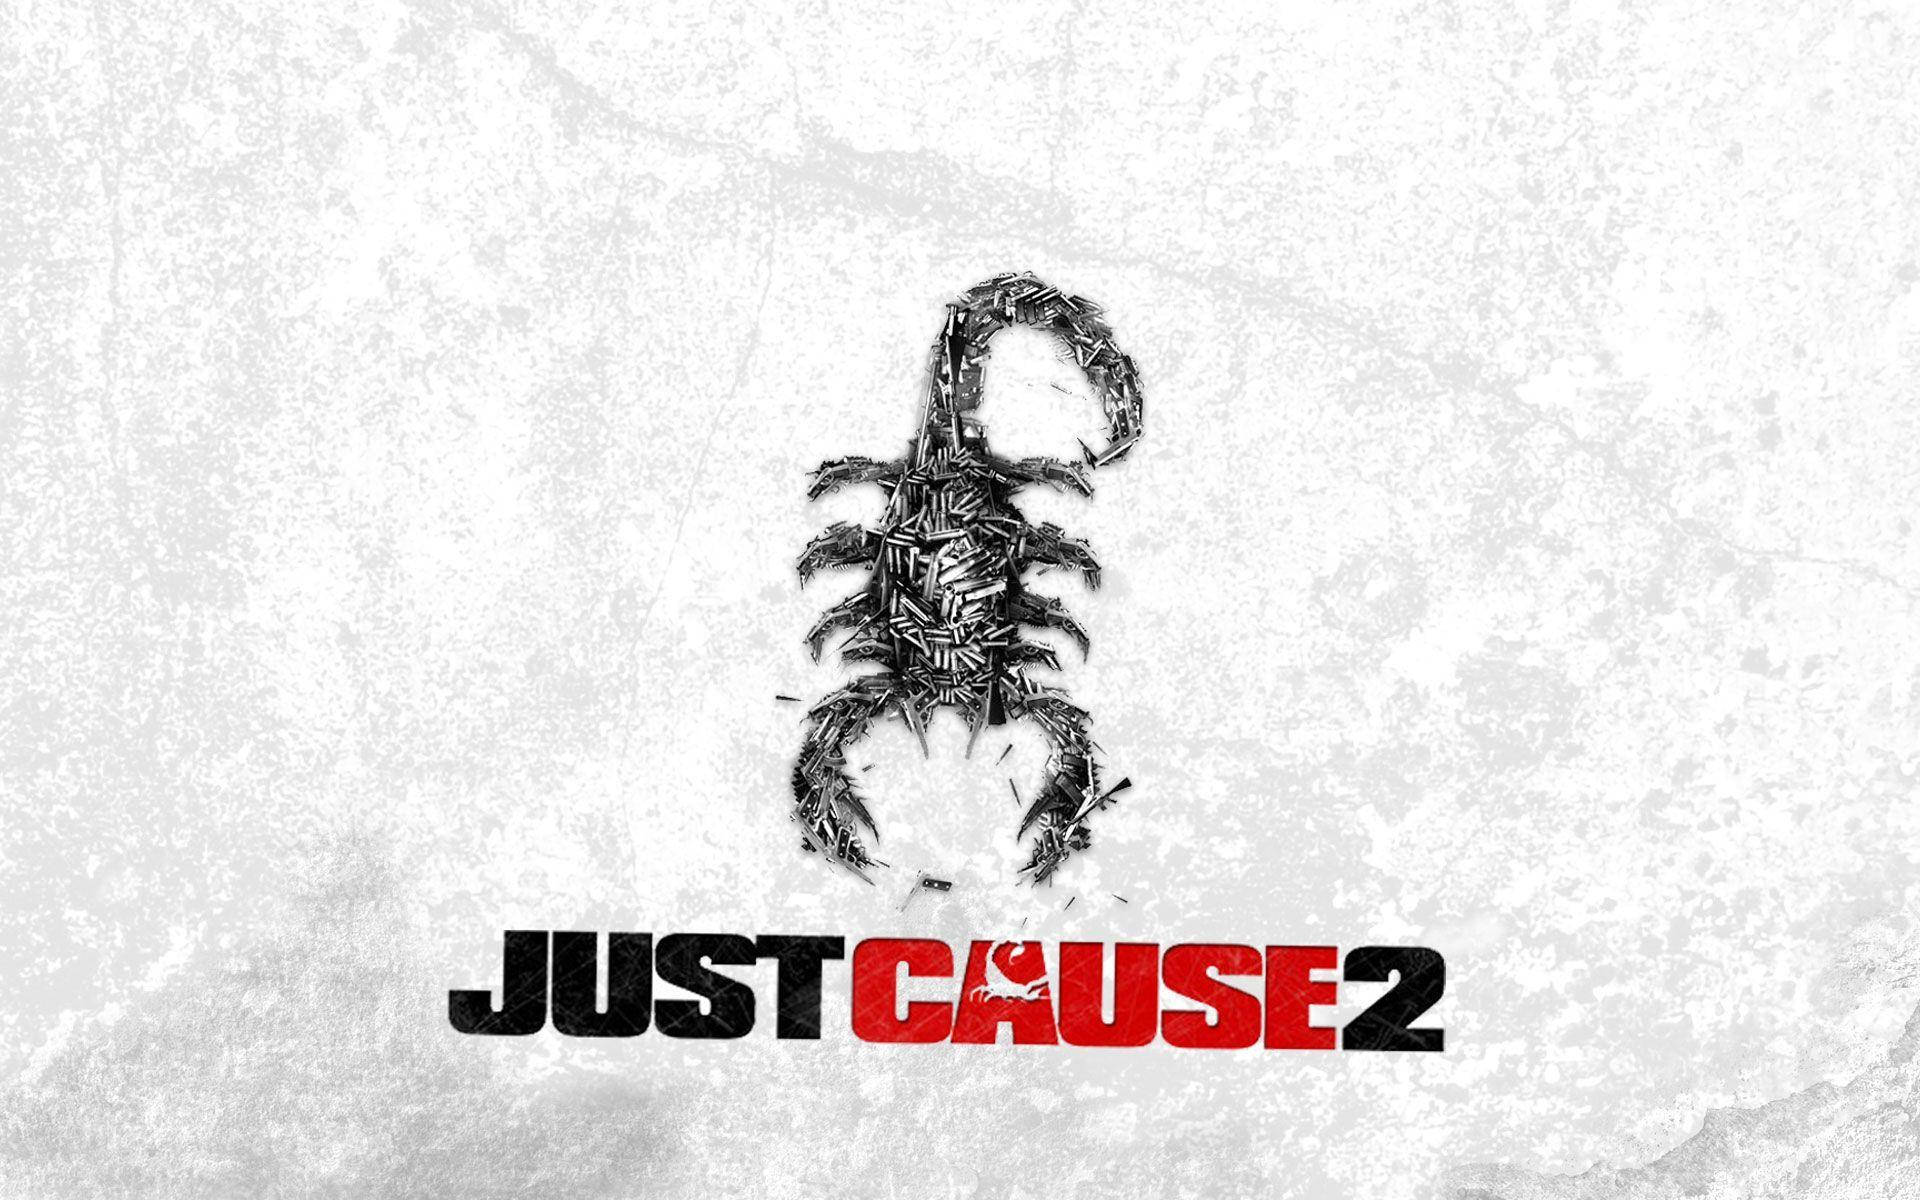 Just Cause 2 Scorpion Game Poster Background